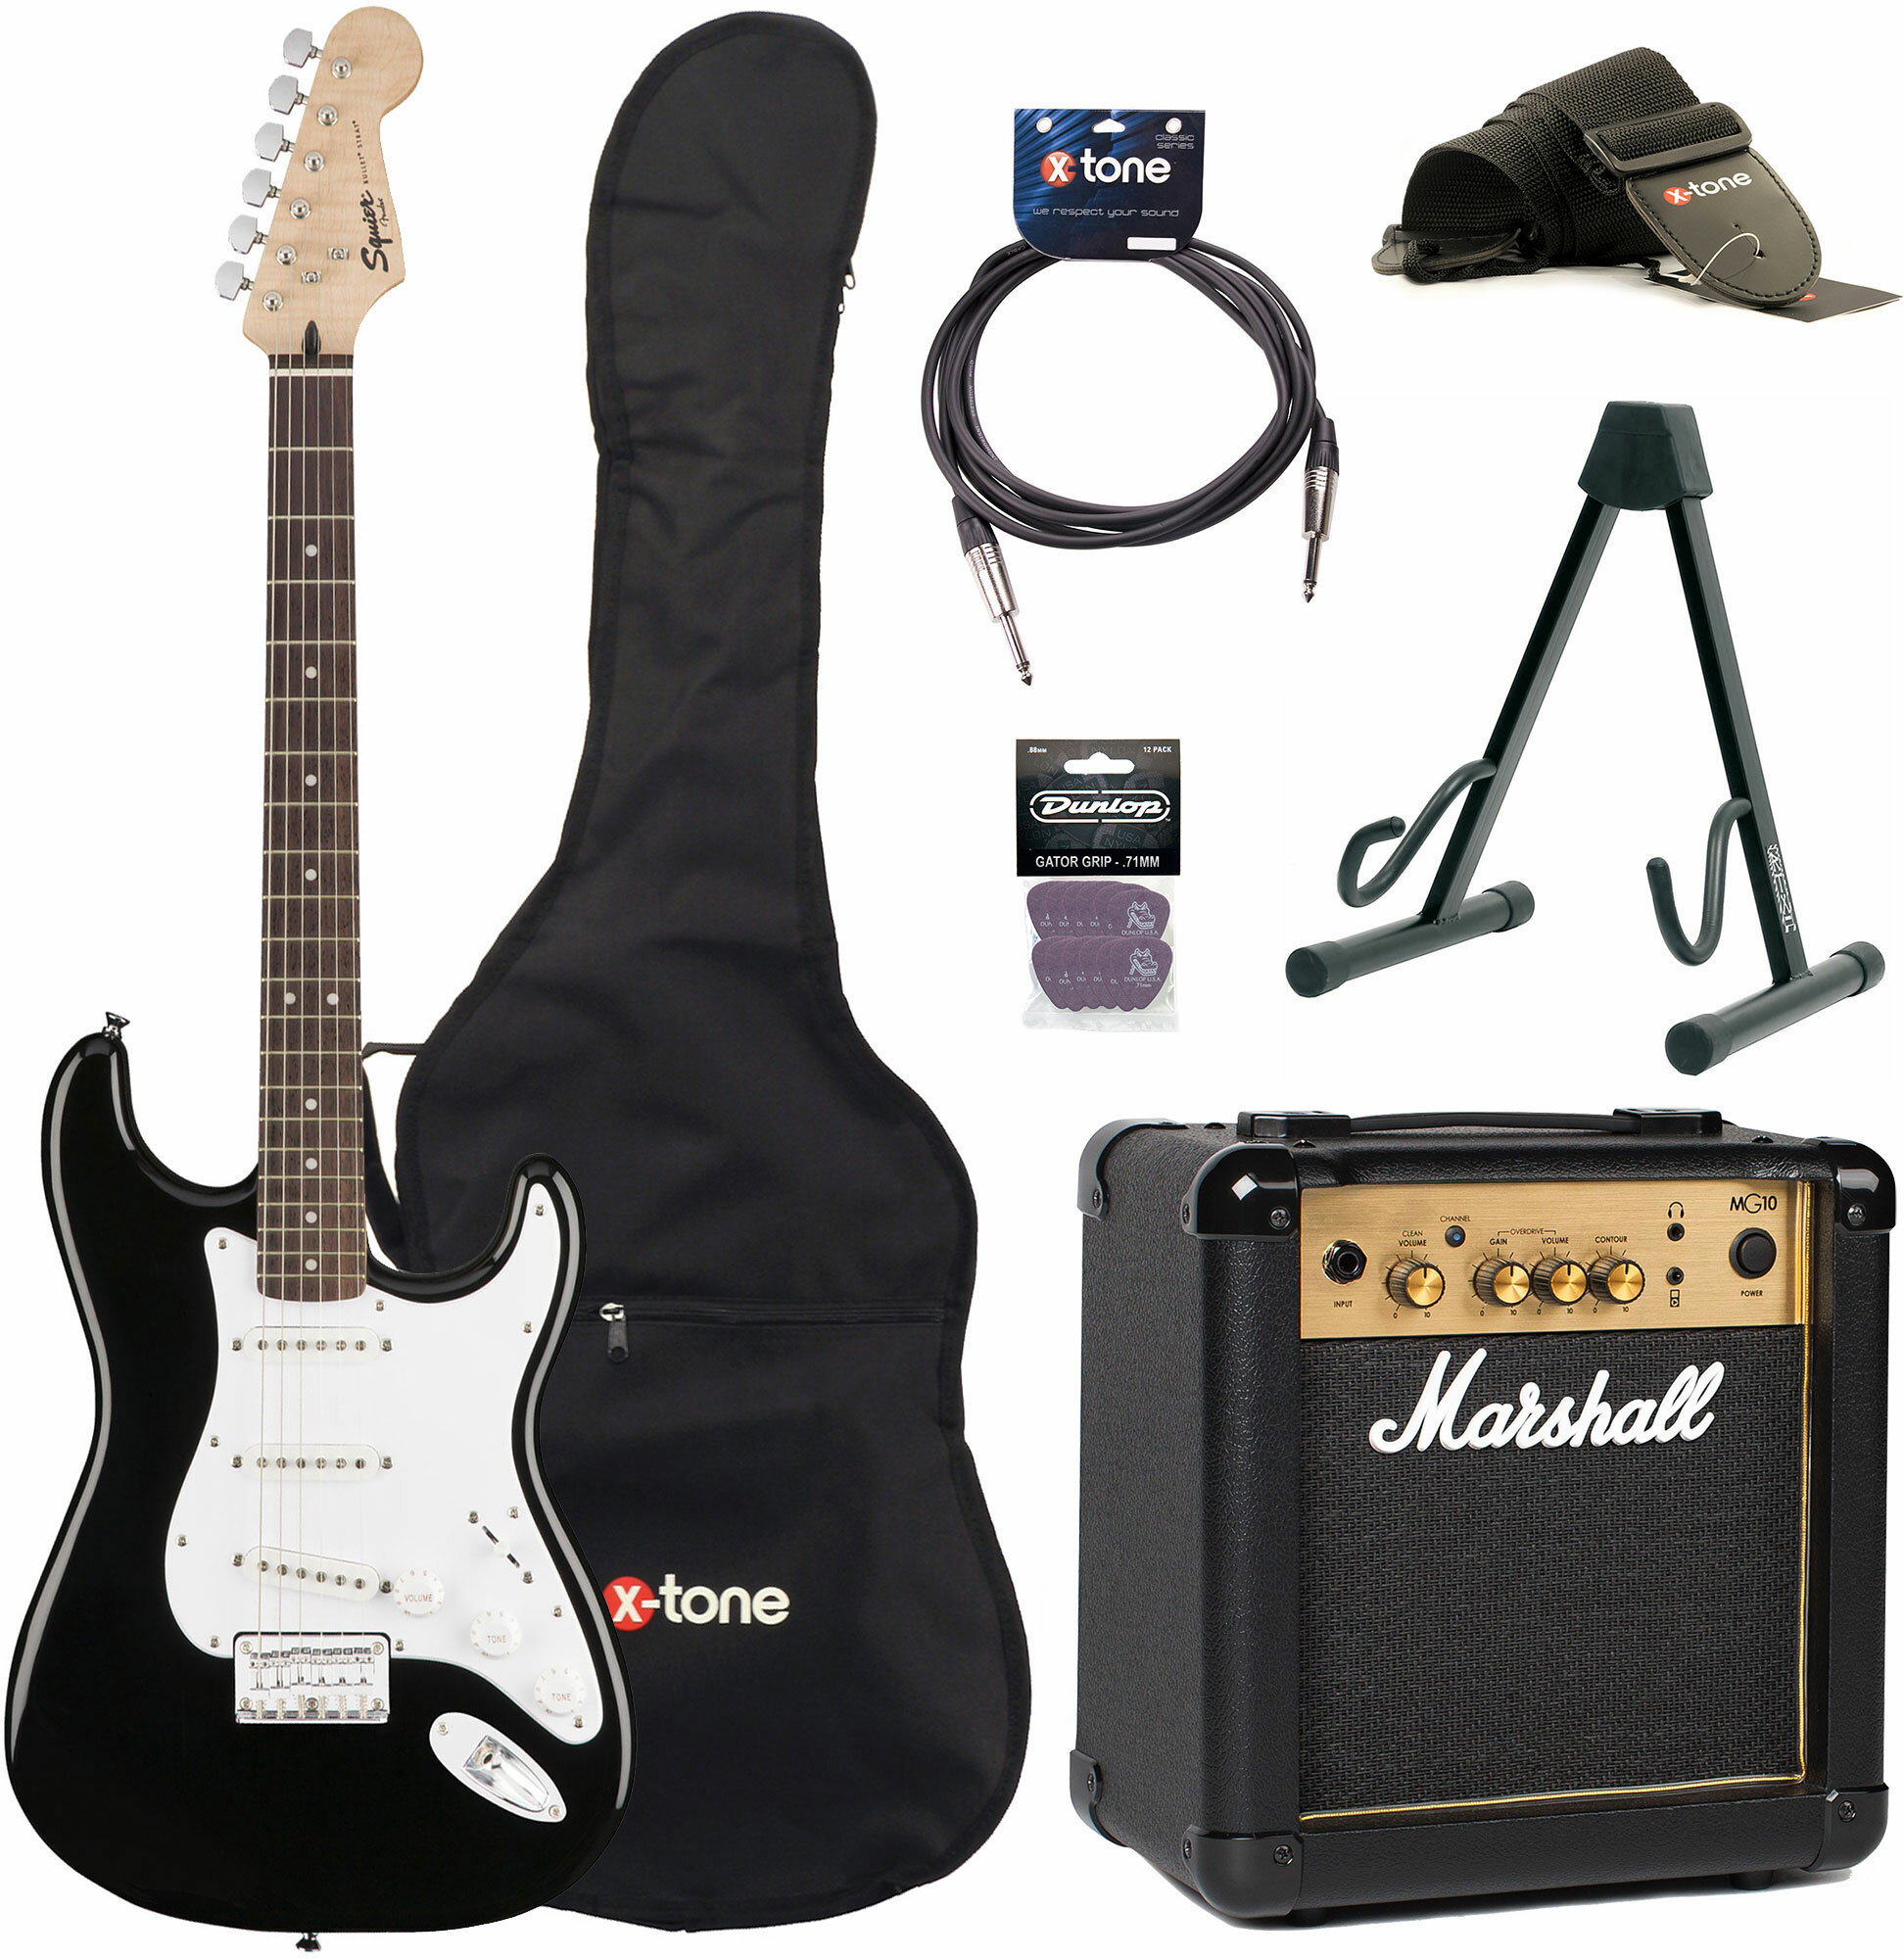 Squier Strat Bullet Ht Hss + Marshall Mg10g + X-tone Access - Black - Electric guitar set - Main picture